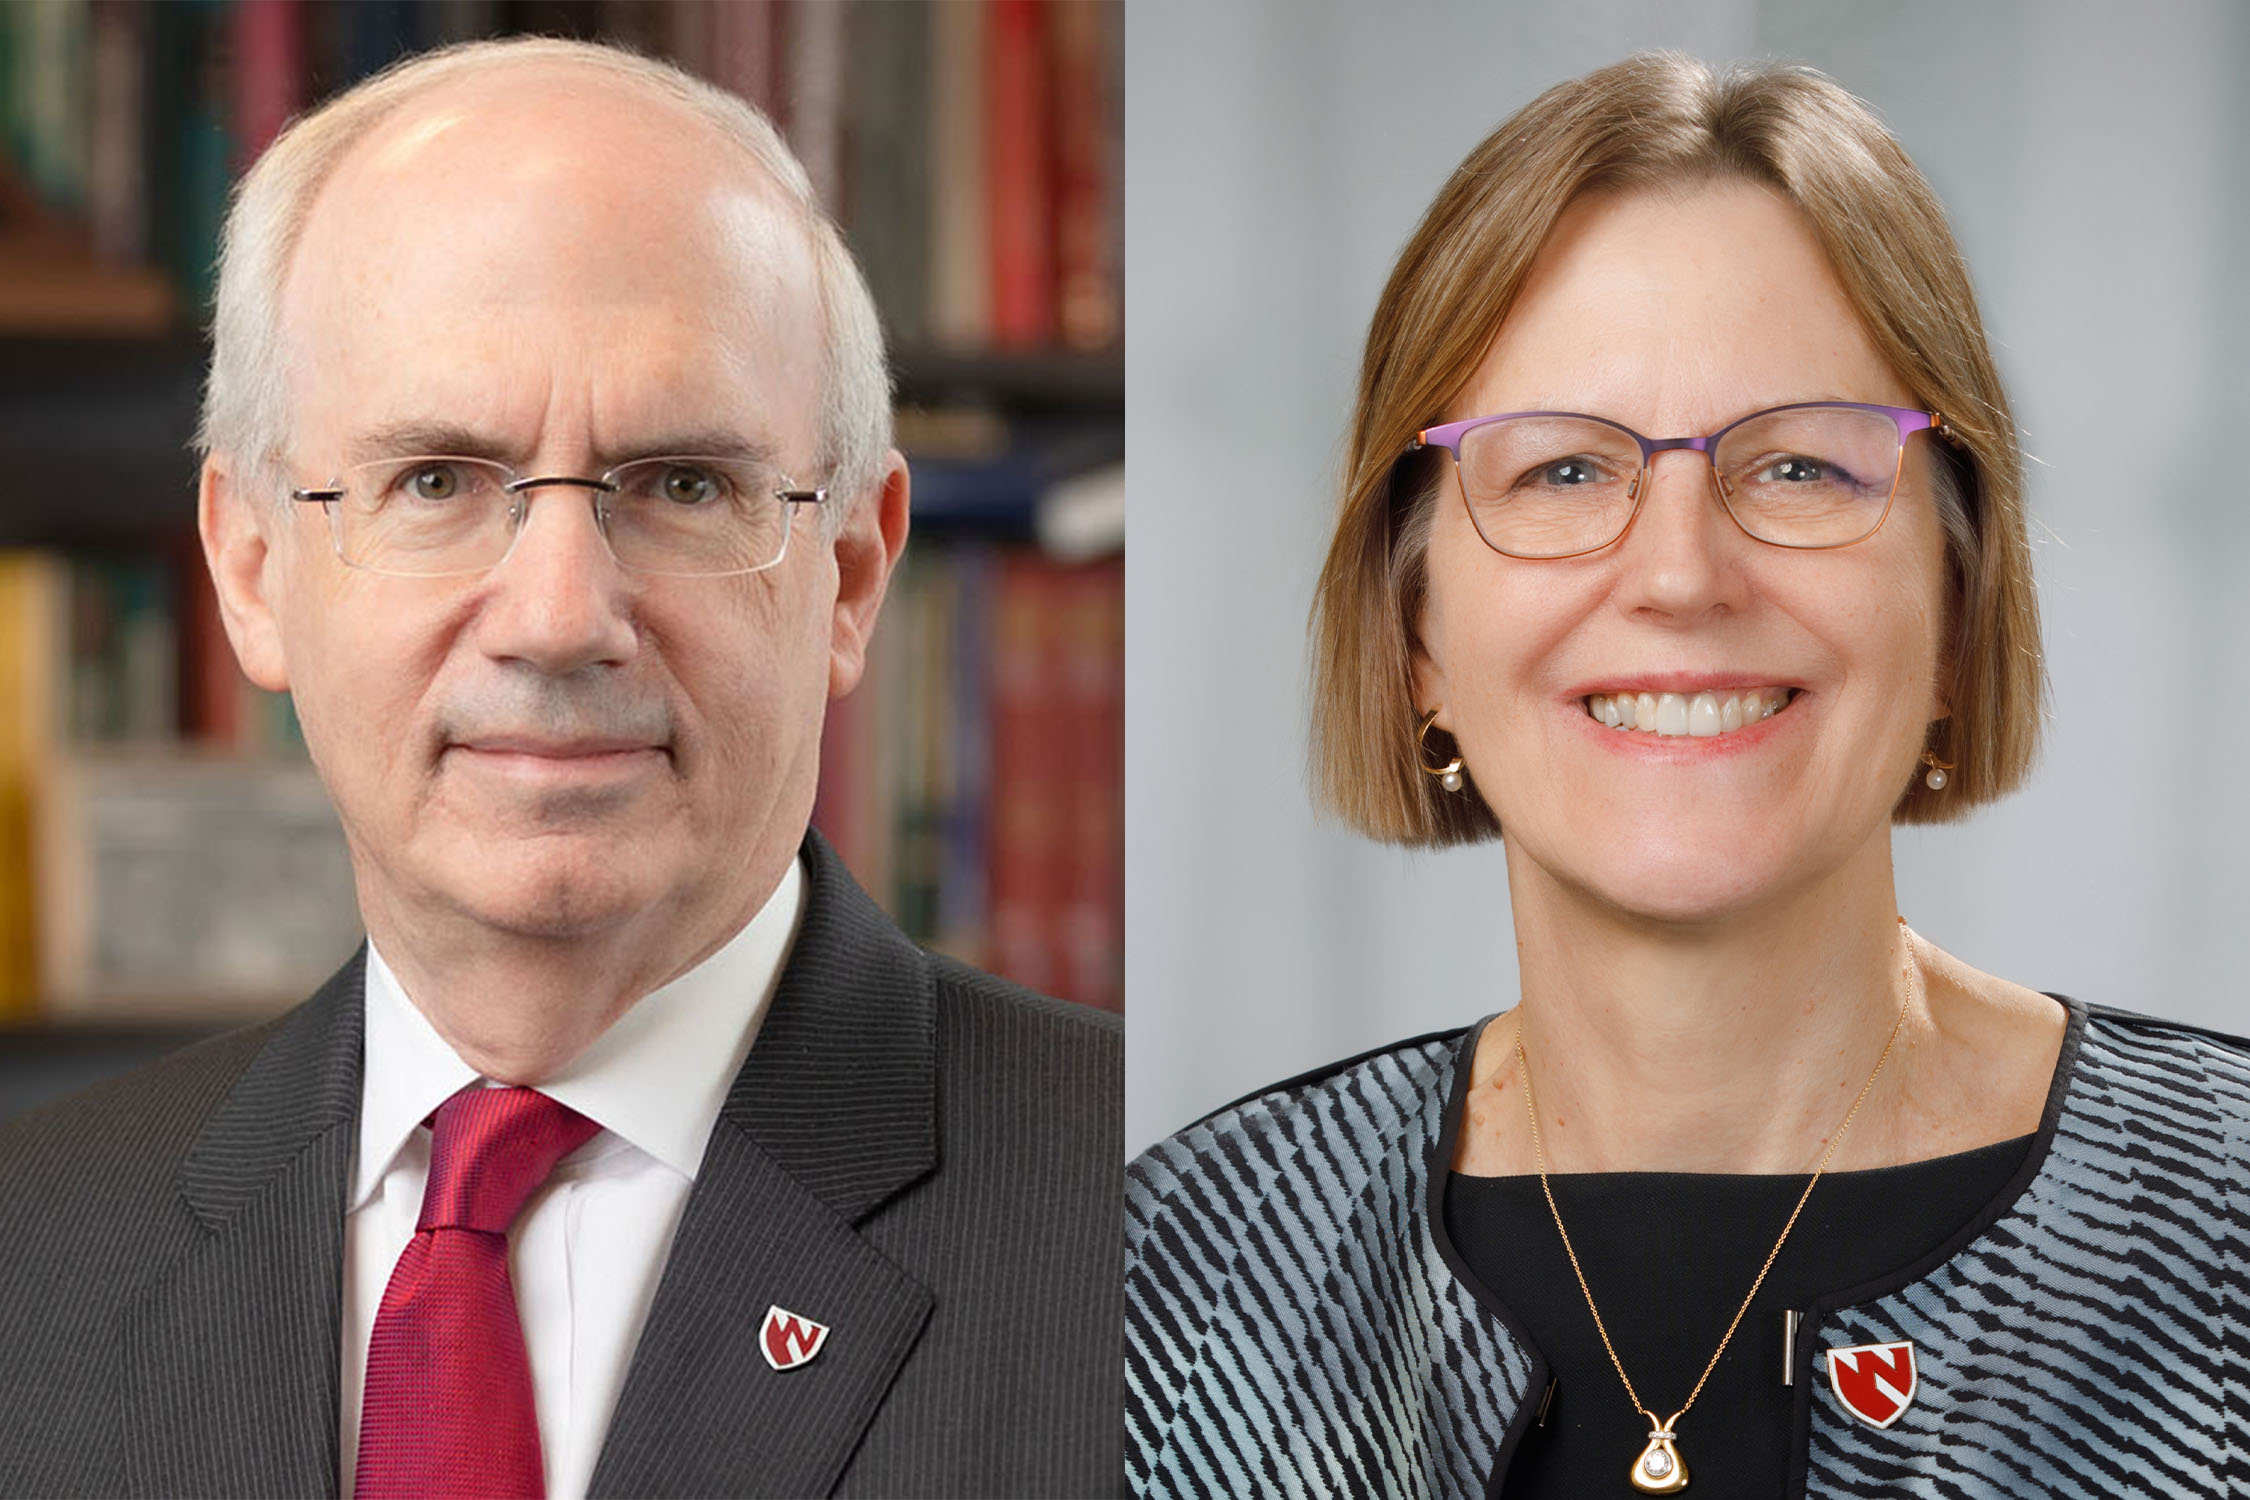 UNMC Chancellor Jeffrey P&period; Gold&comma; MD&comma; and Joann Sweasy&comma; PhD&comma; director of the Eppley Institute for Research in Cancer and Allied Diseases and the Fred & Pamela Buffett Cancer Center